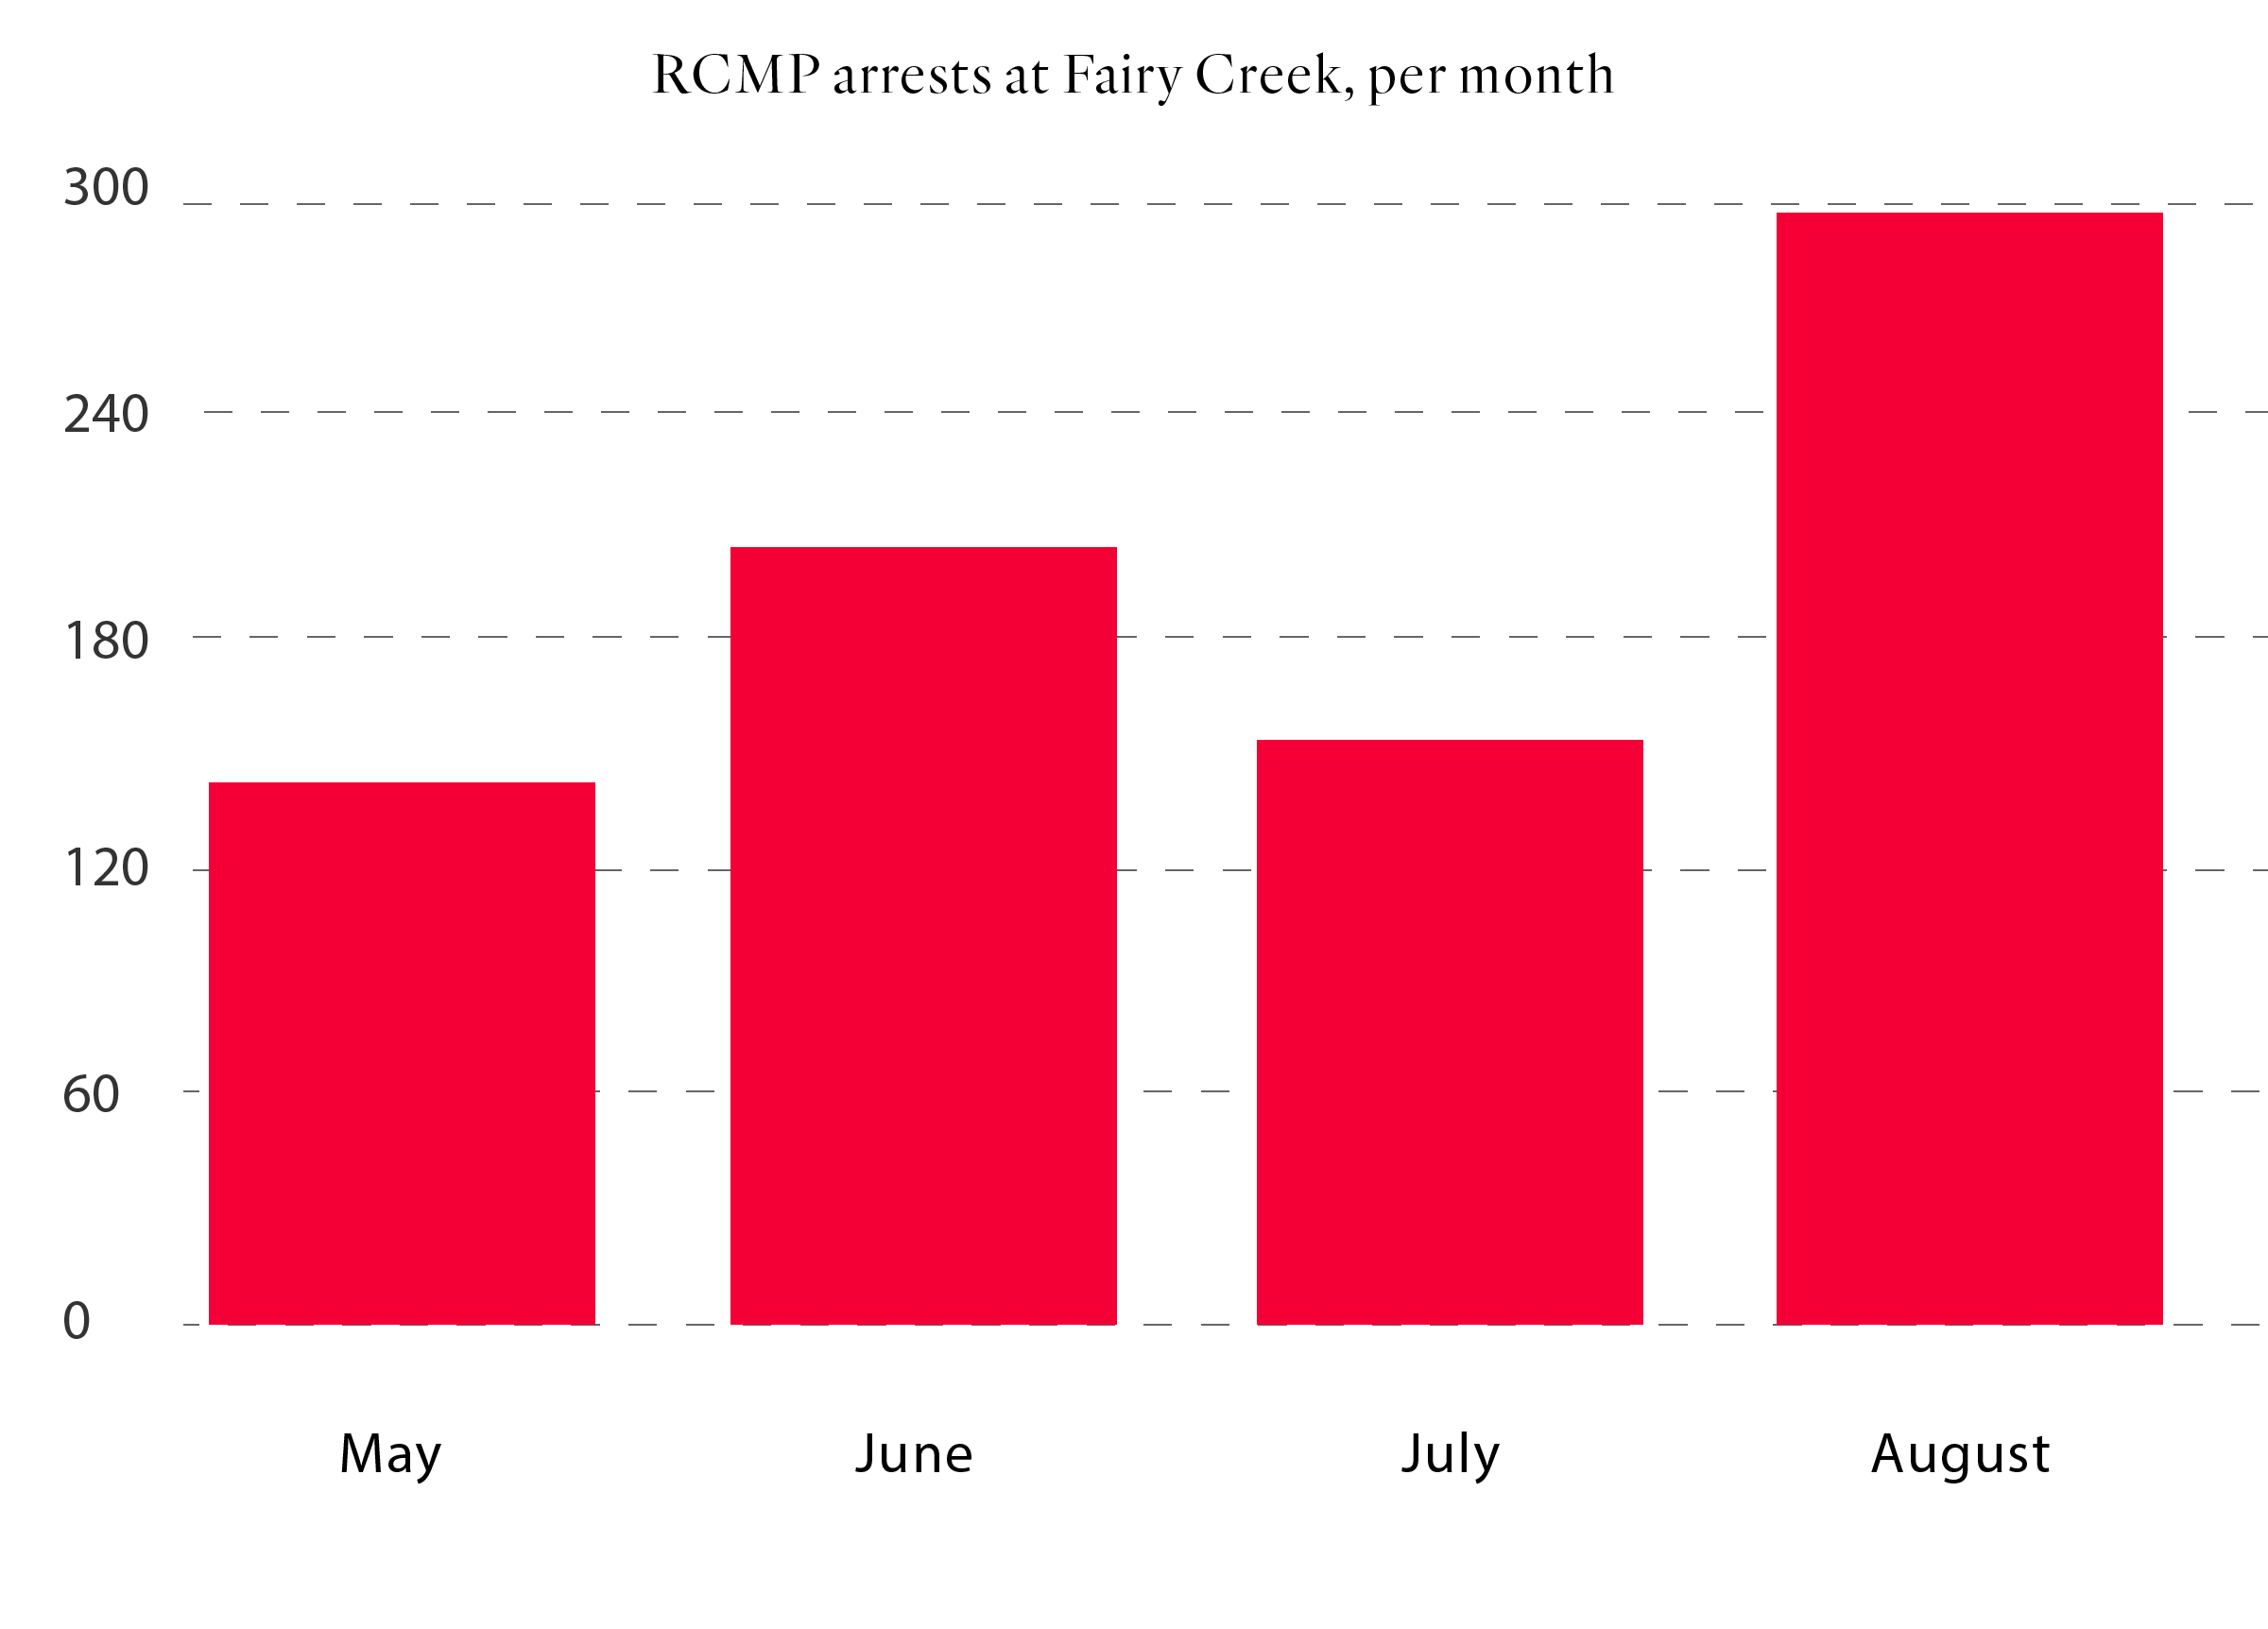 bar graph of monthly RCMP arrests at Fairy Creek